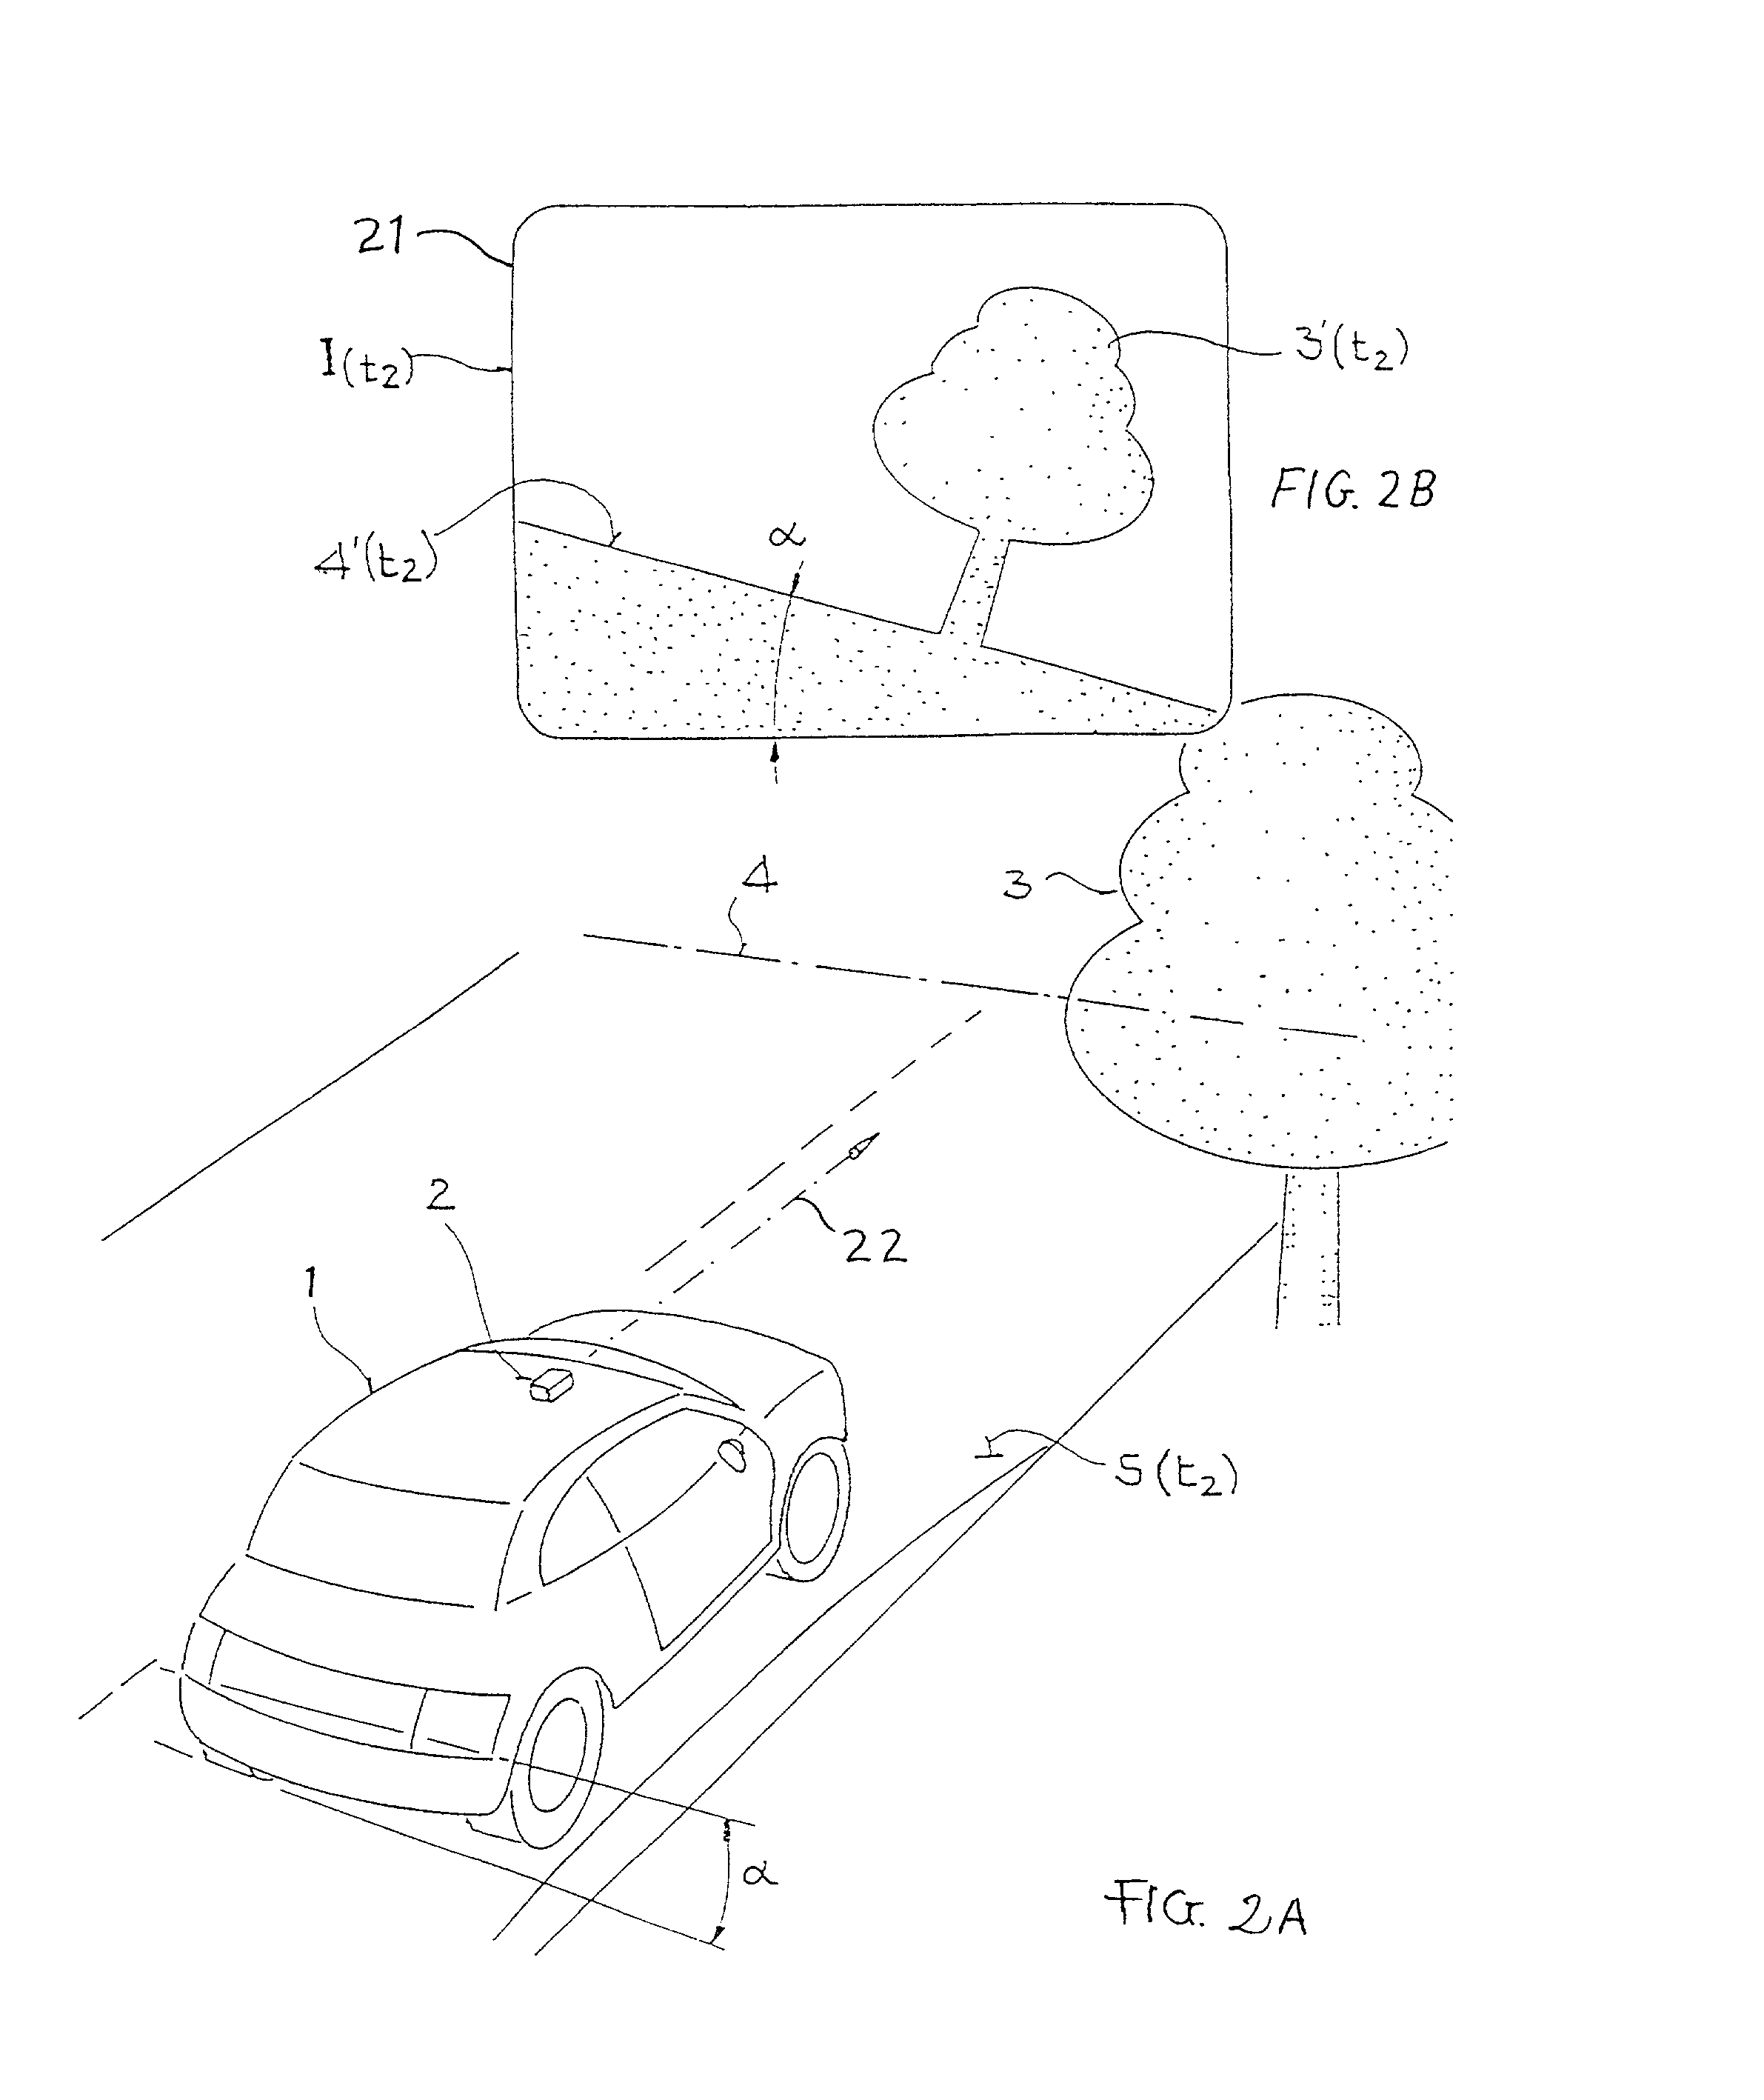 Method for optically monitoring the environment of a moving vehicle to determine an inclination angle